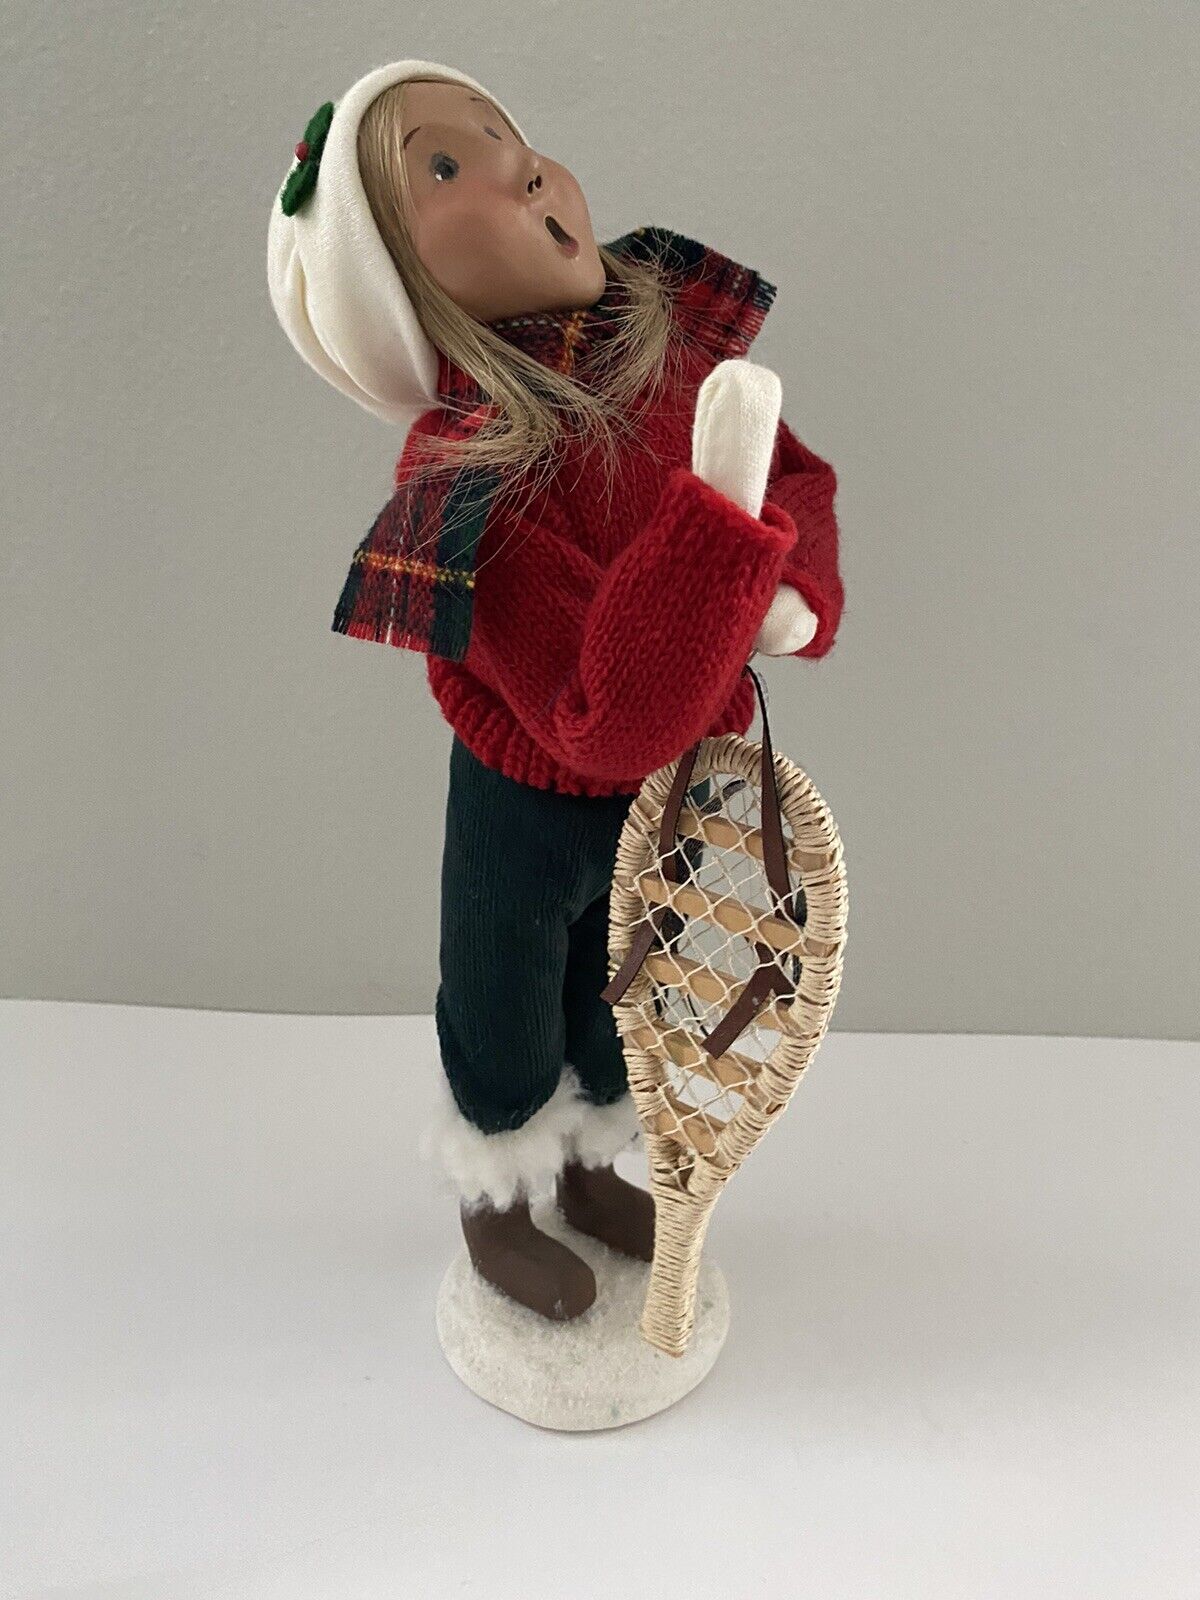 2000 Byers Choice Caroler Adult Woman with Snowshoes Limited Edition 61/100